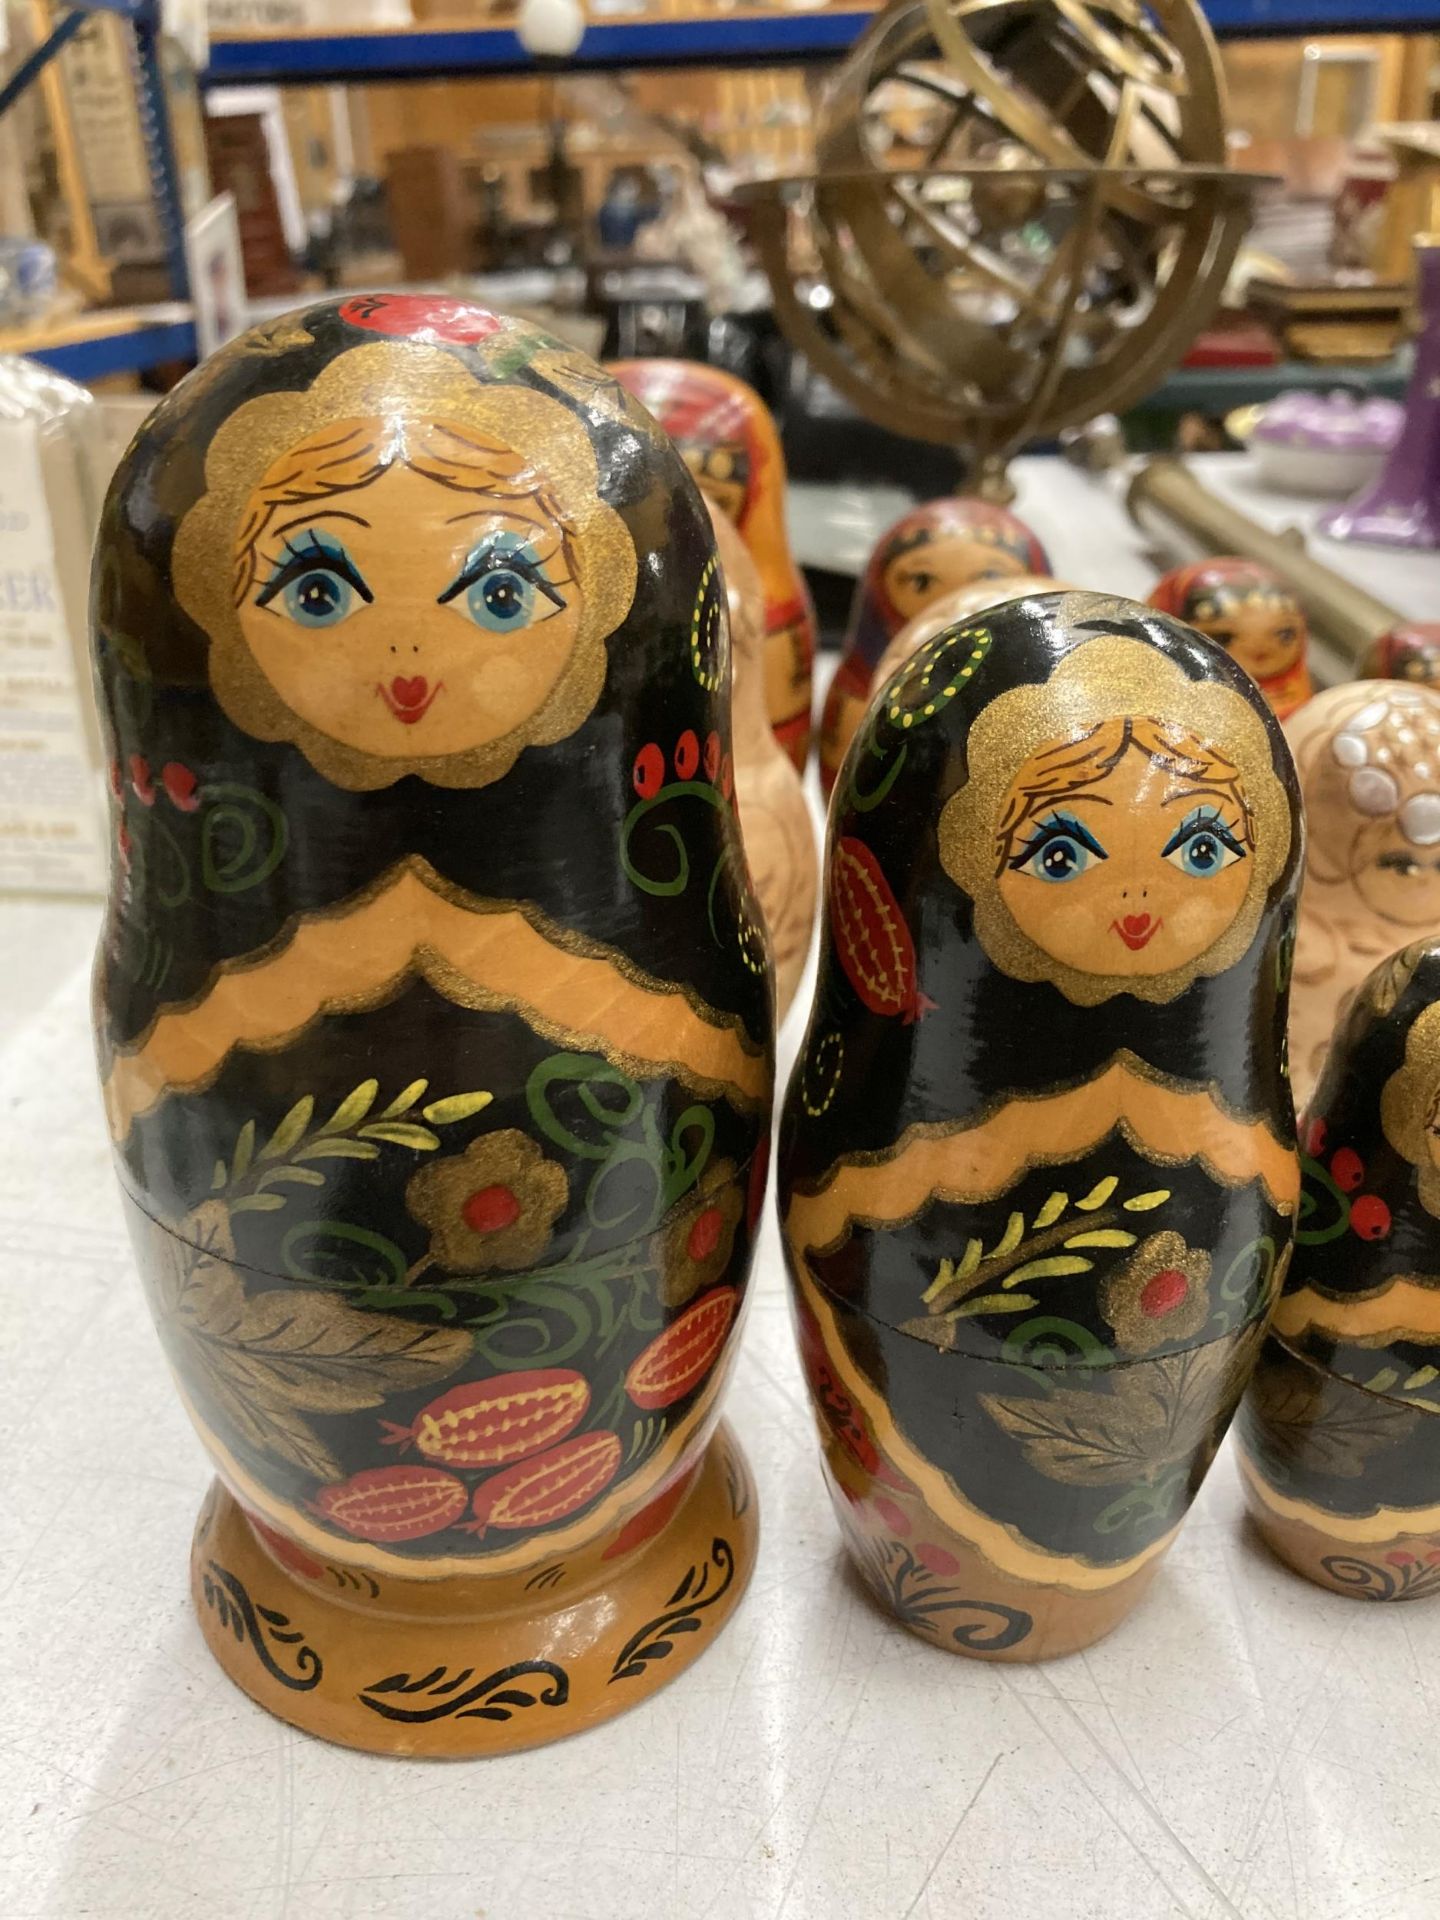 THREE SETS OF RUSSIAN STYLE NESTING DOLLS - Image 2 of 4